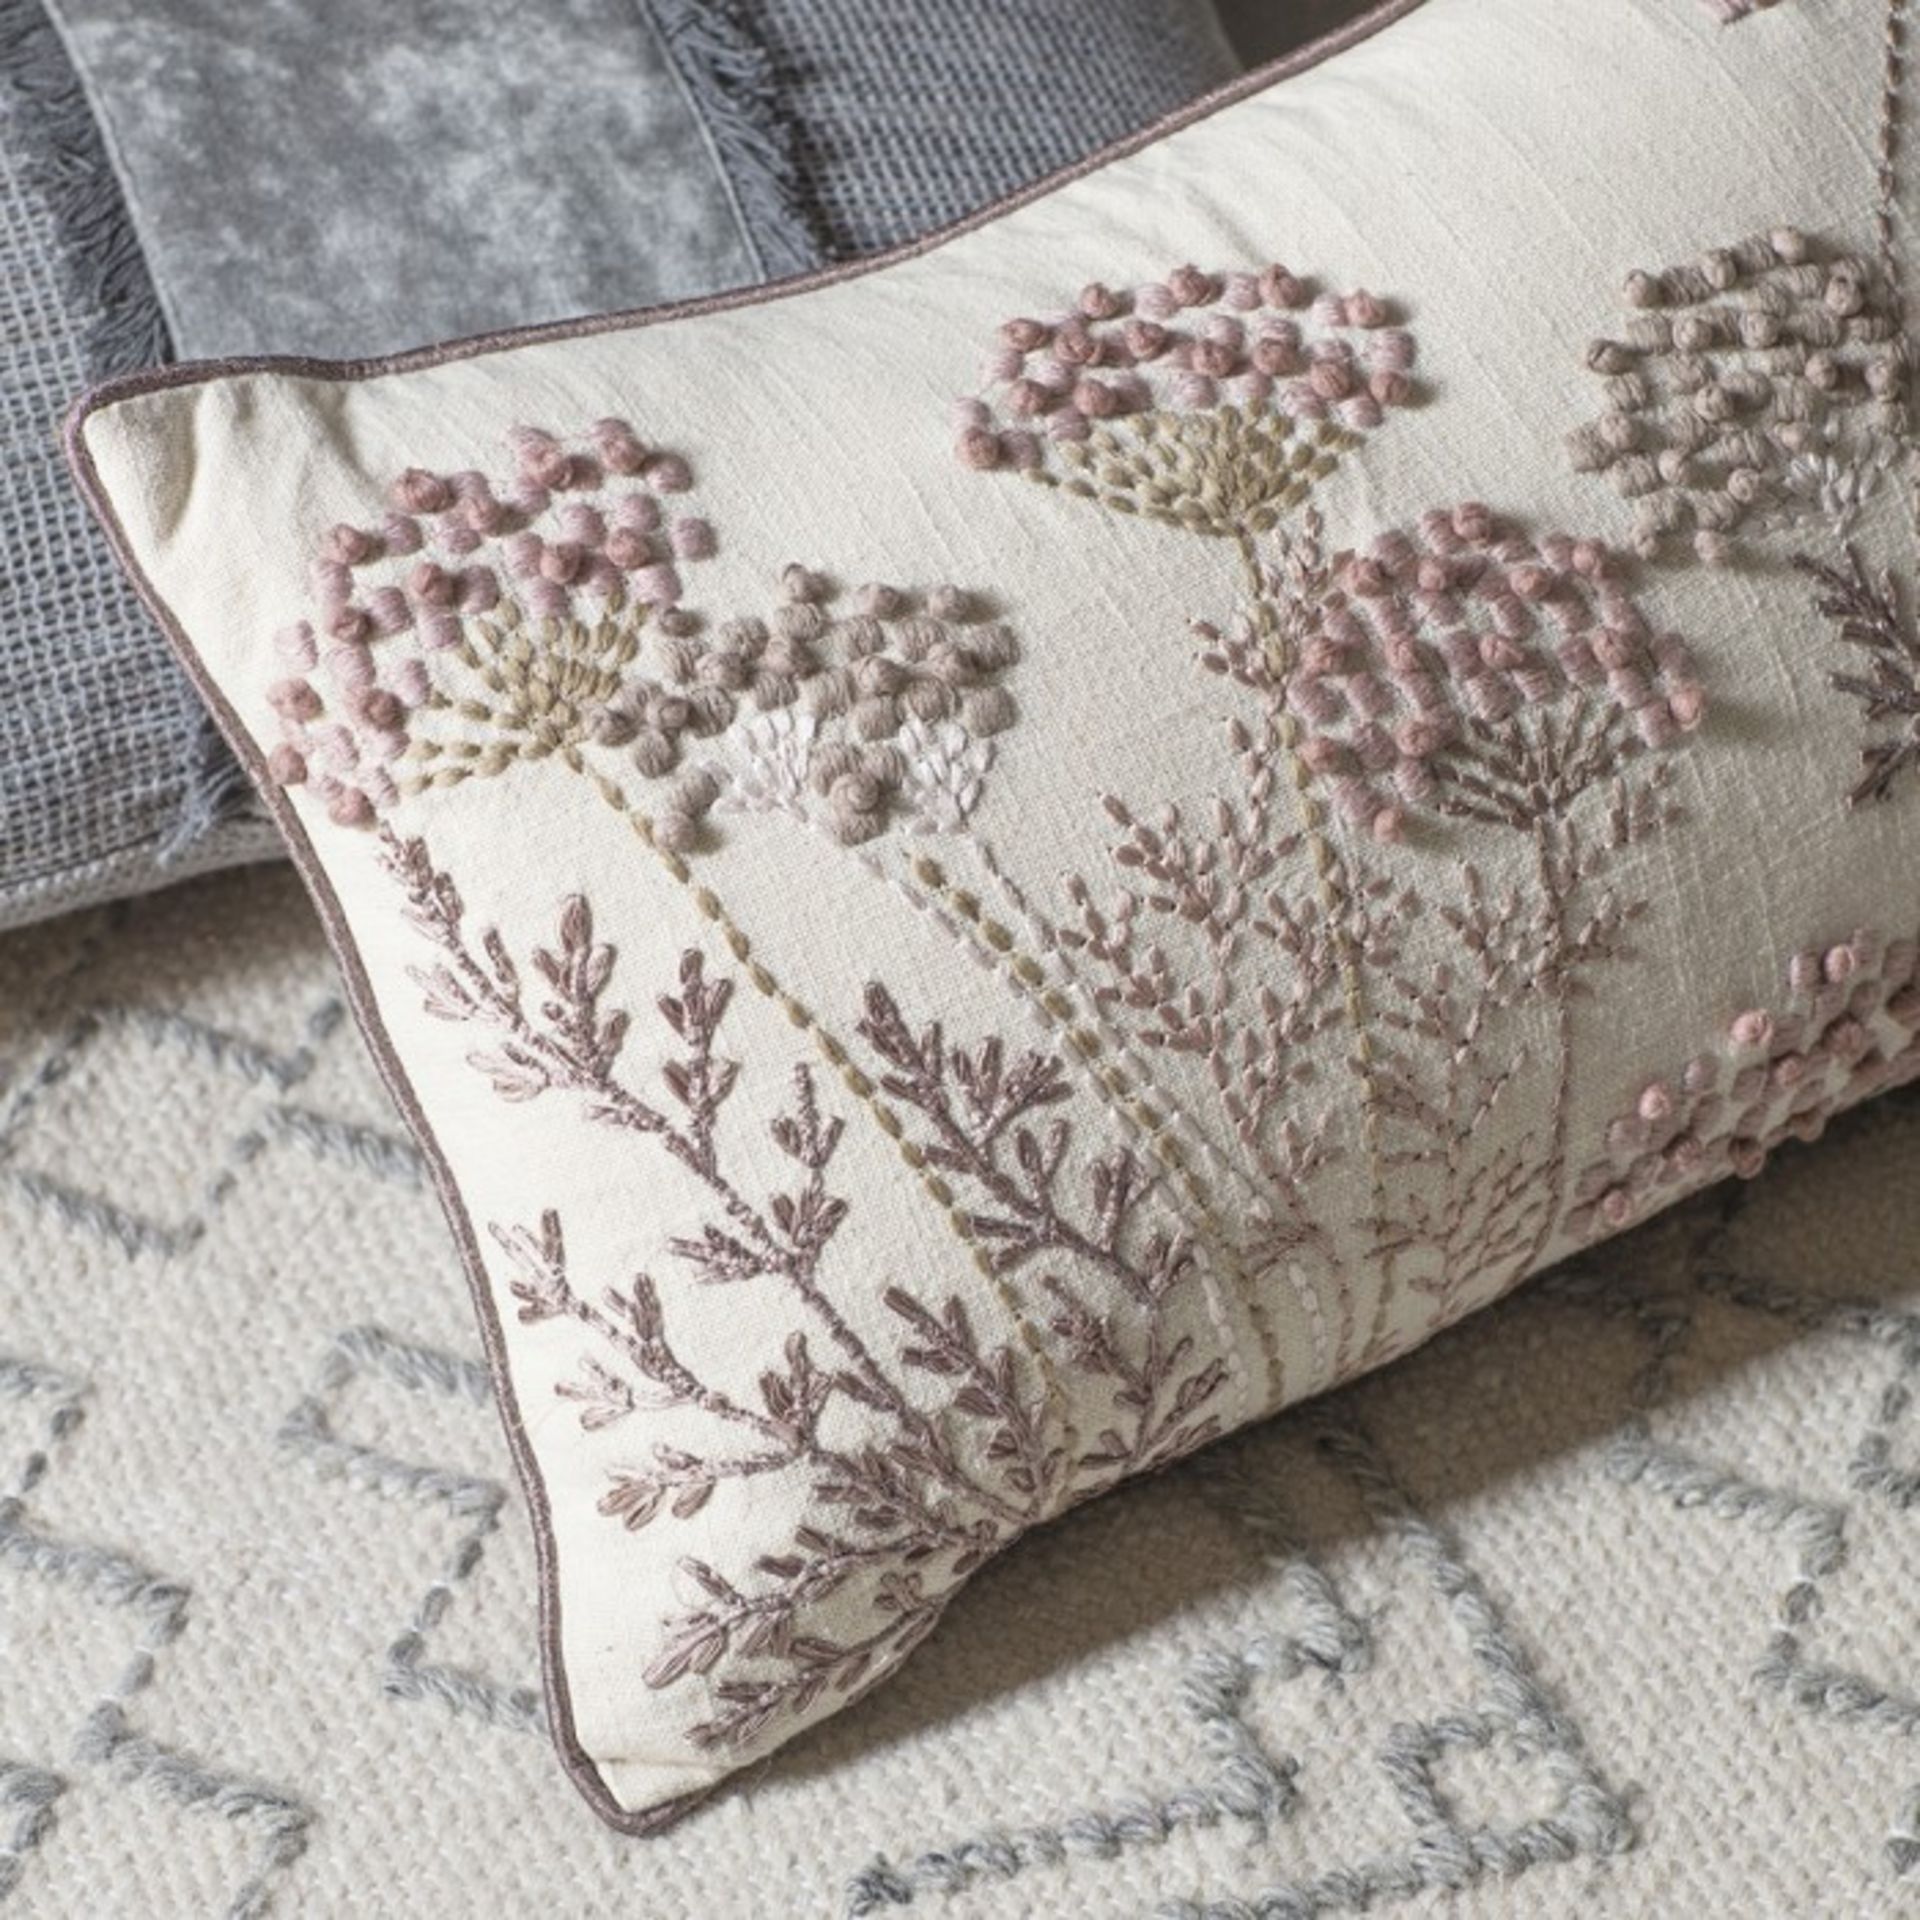 Luxury Embroidered Cushion